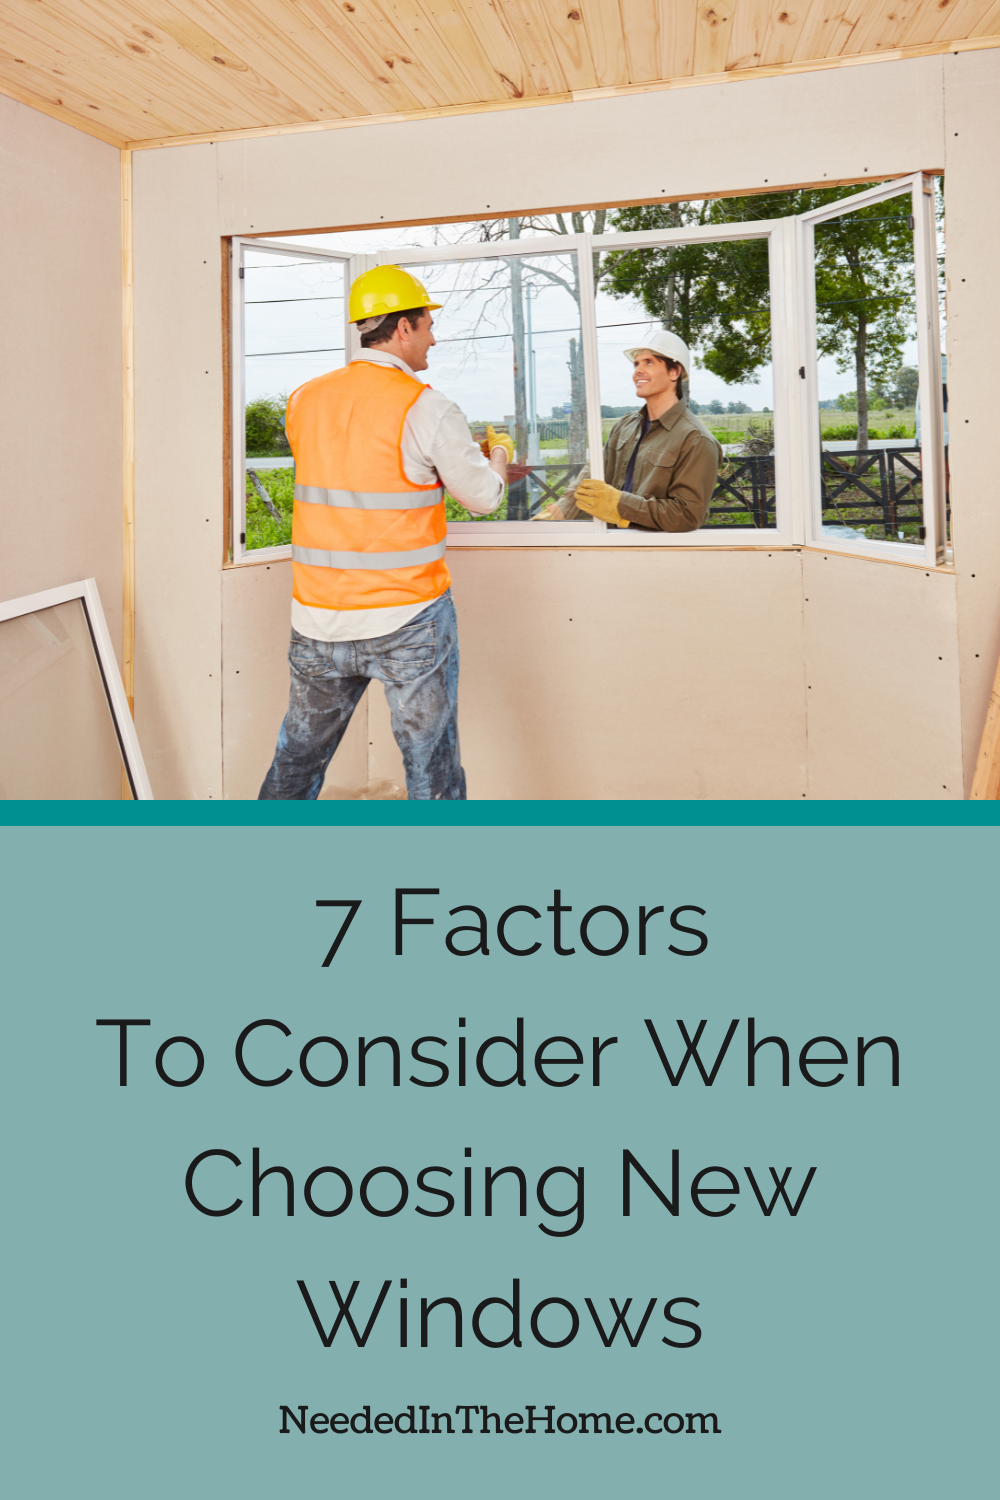 pinterest pin description 7 factors to consider when choosing new windows two men installing a bay window in living room neededinthehome